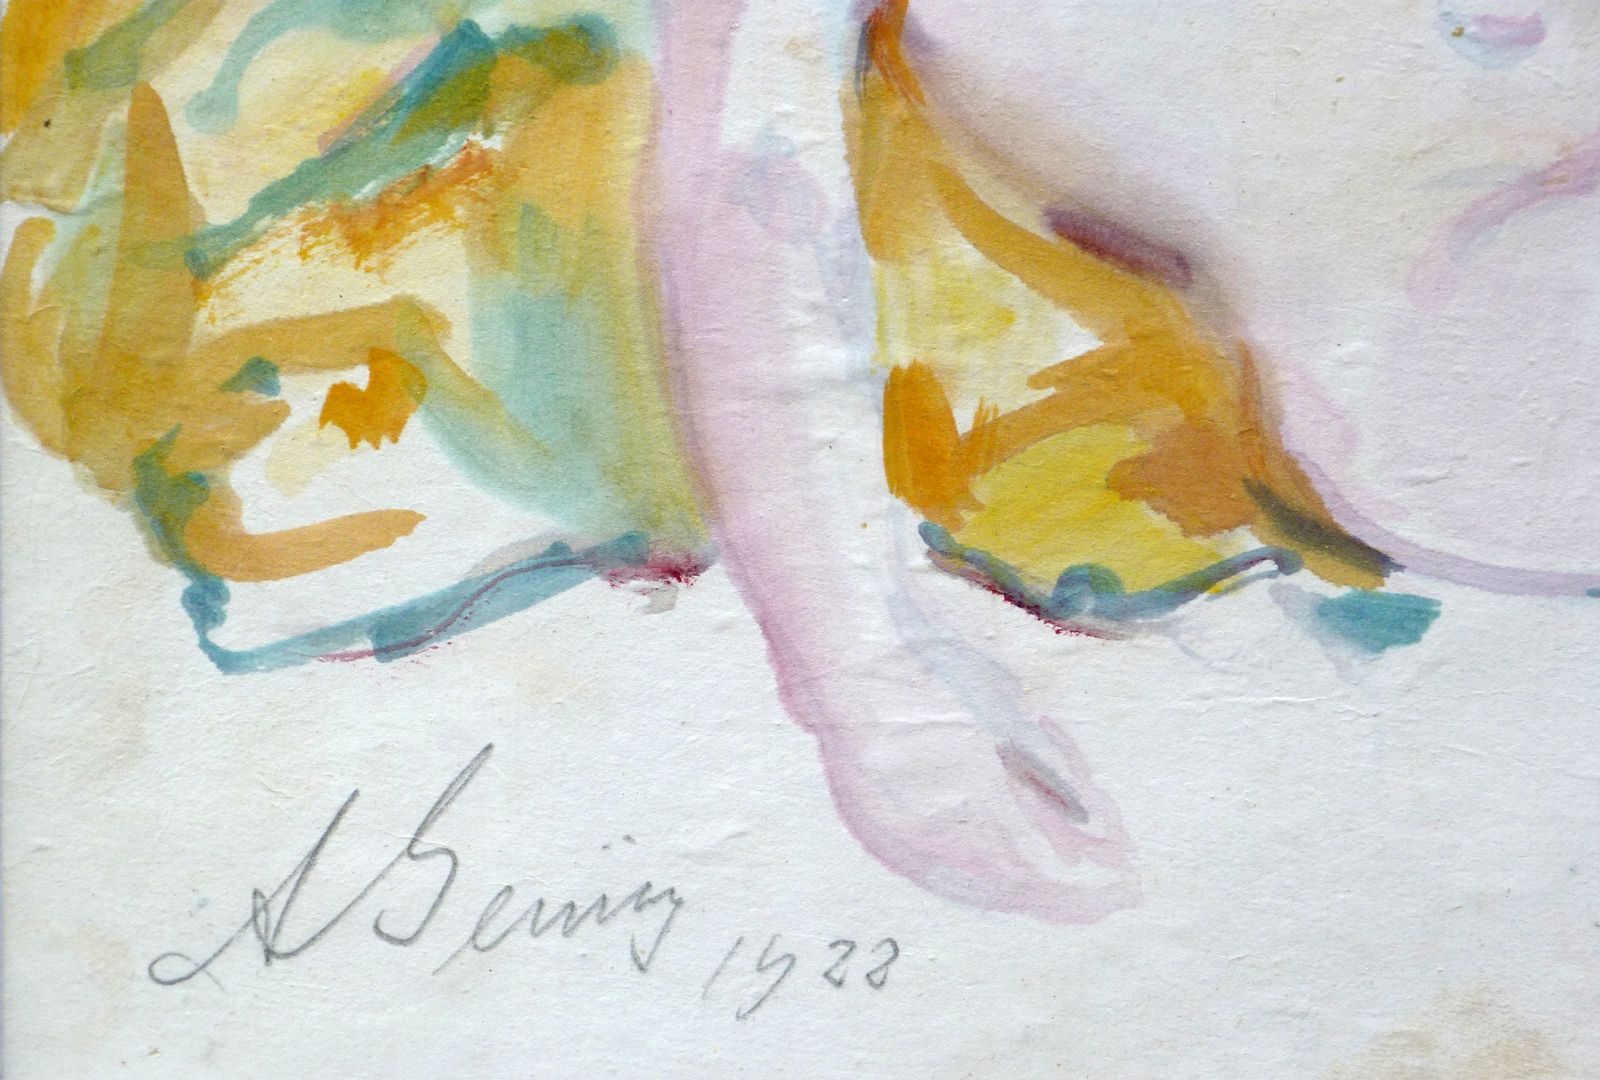 Female nude Detail with artist's signature